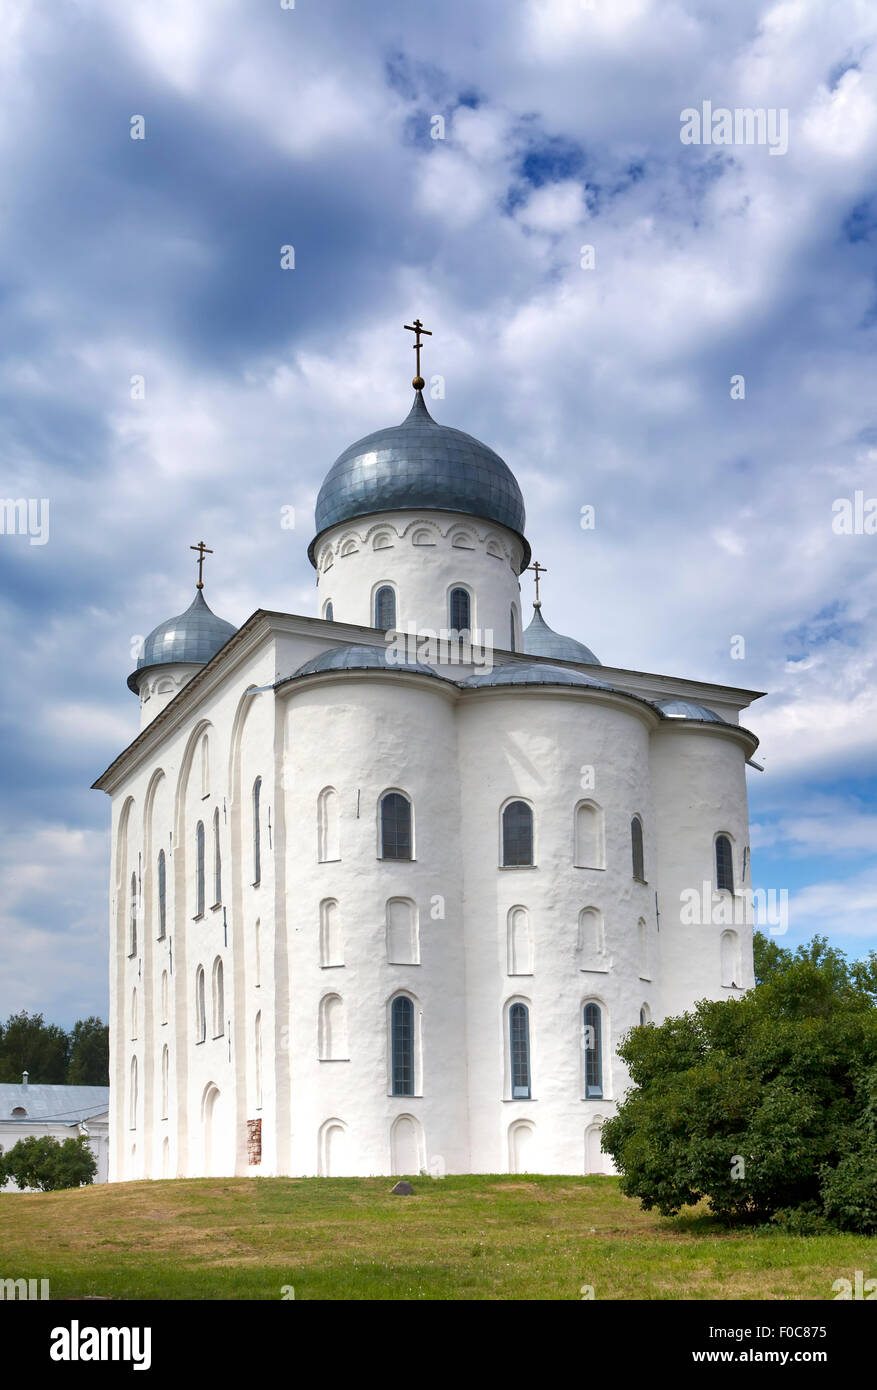 Sankt-Georgs Kathedrale, Russisches orthodoxes Kloster Yuriev in Groß Nowgorod (Weliki Nowgorod). Russland Stockfoto